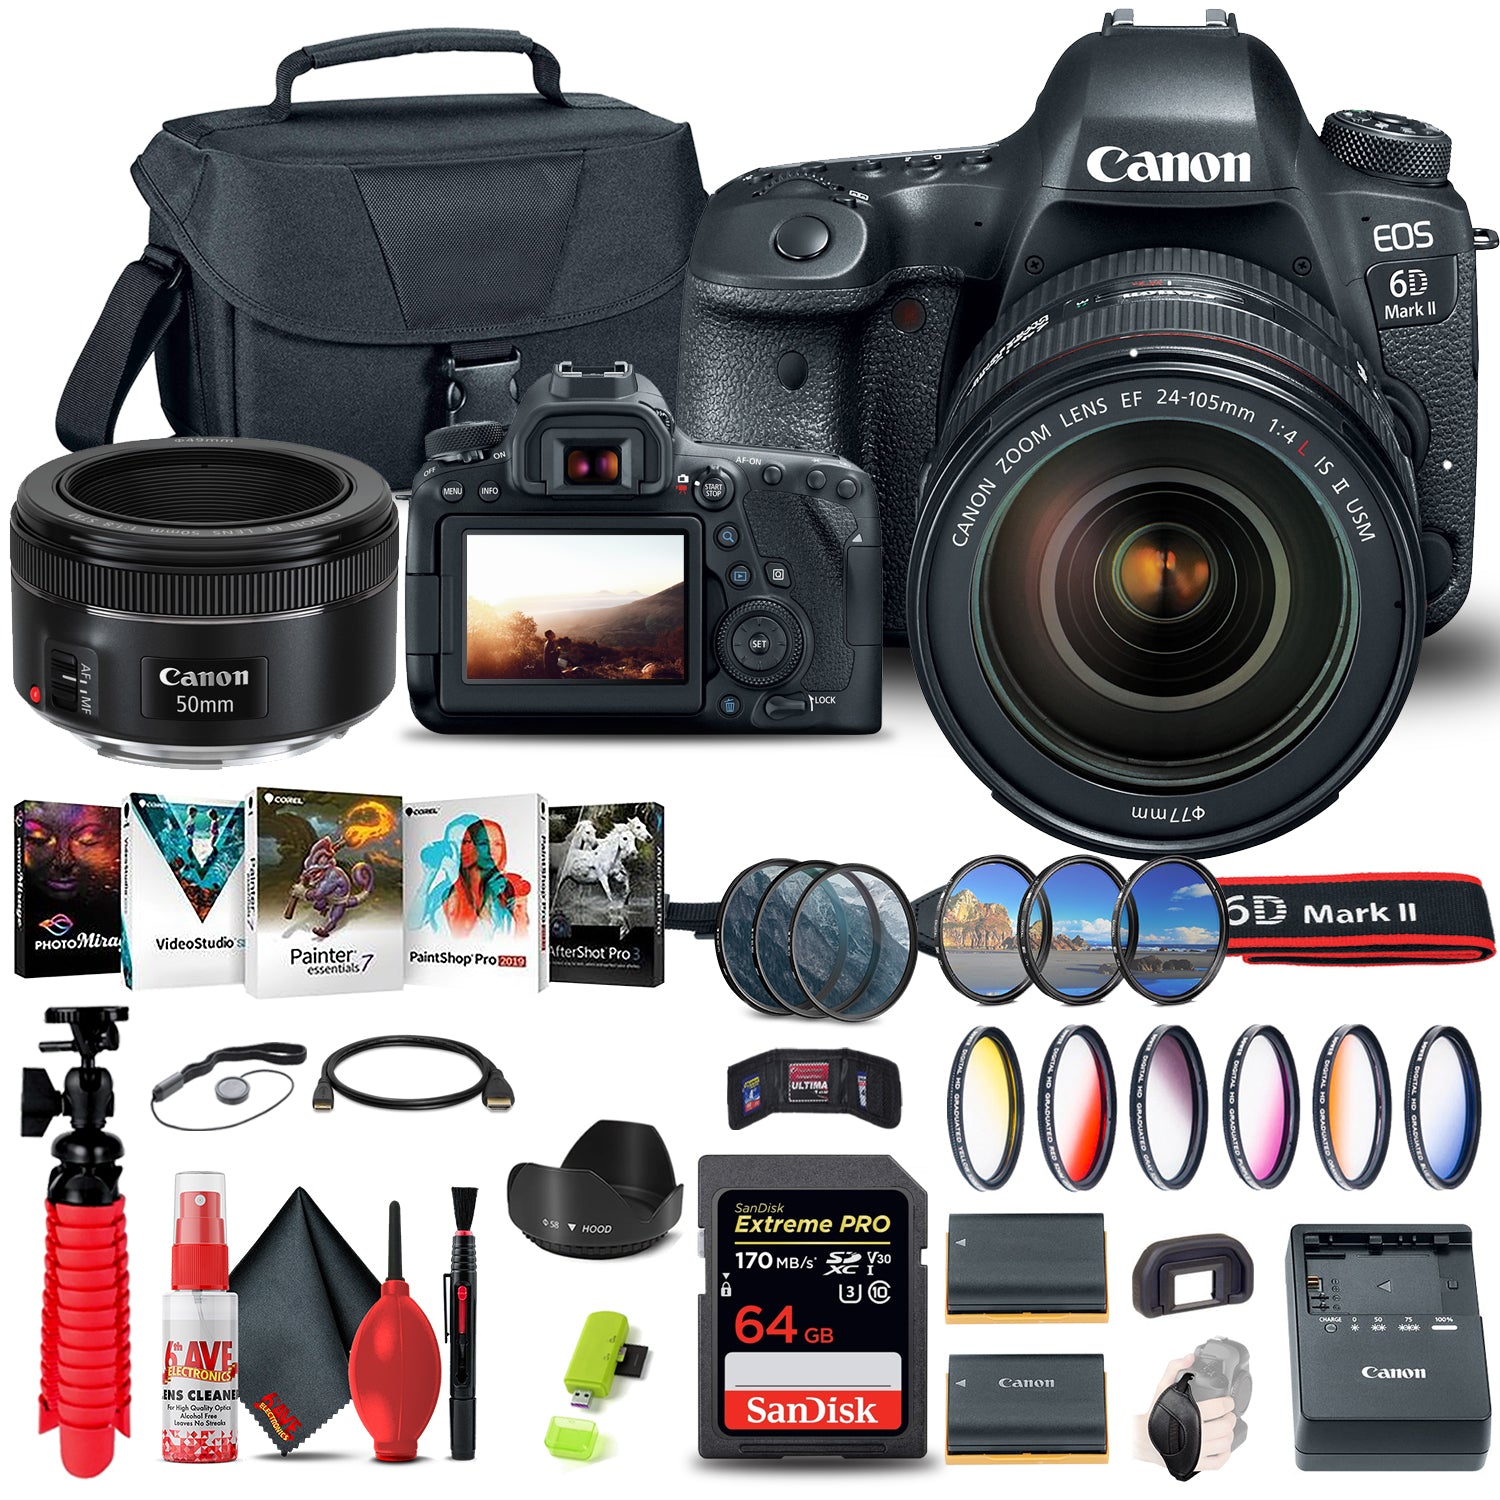 Canon EOS 6D Mark II Camera with 24-105mm f/4L II Lens (1897C009) Ultimate Graphic Bundle